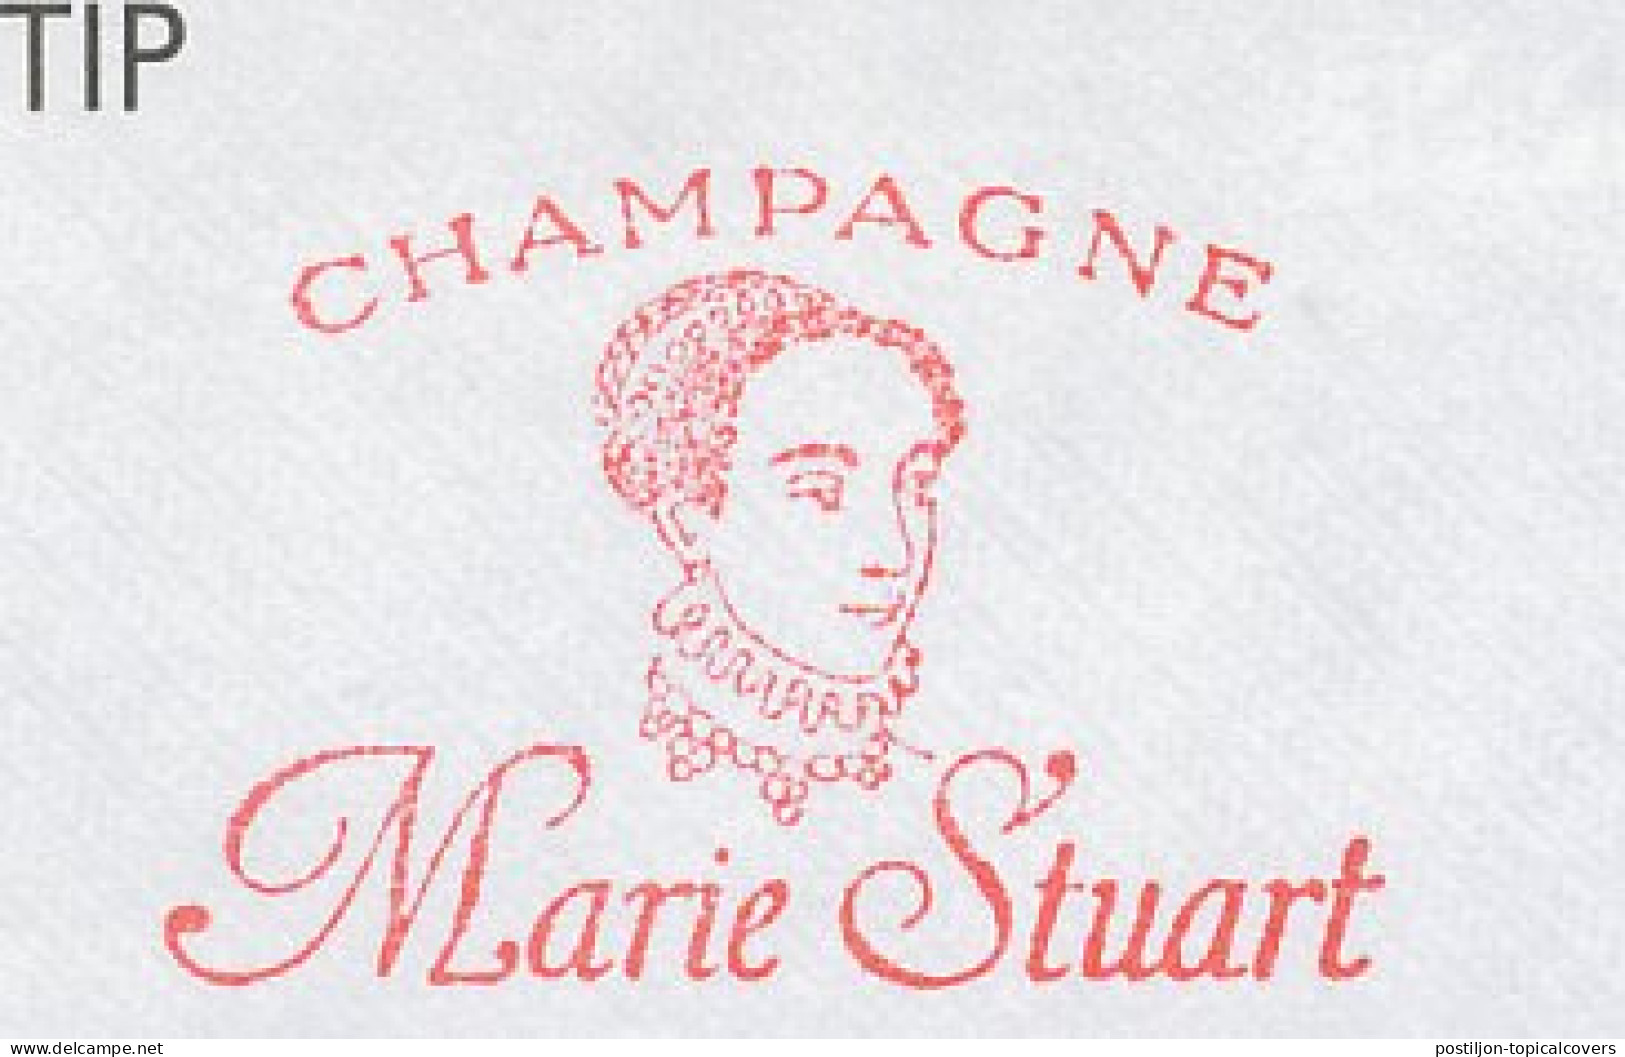 Meter Cover France 2003 Champagne - Marie Stuart - Wein & Alkohol